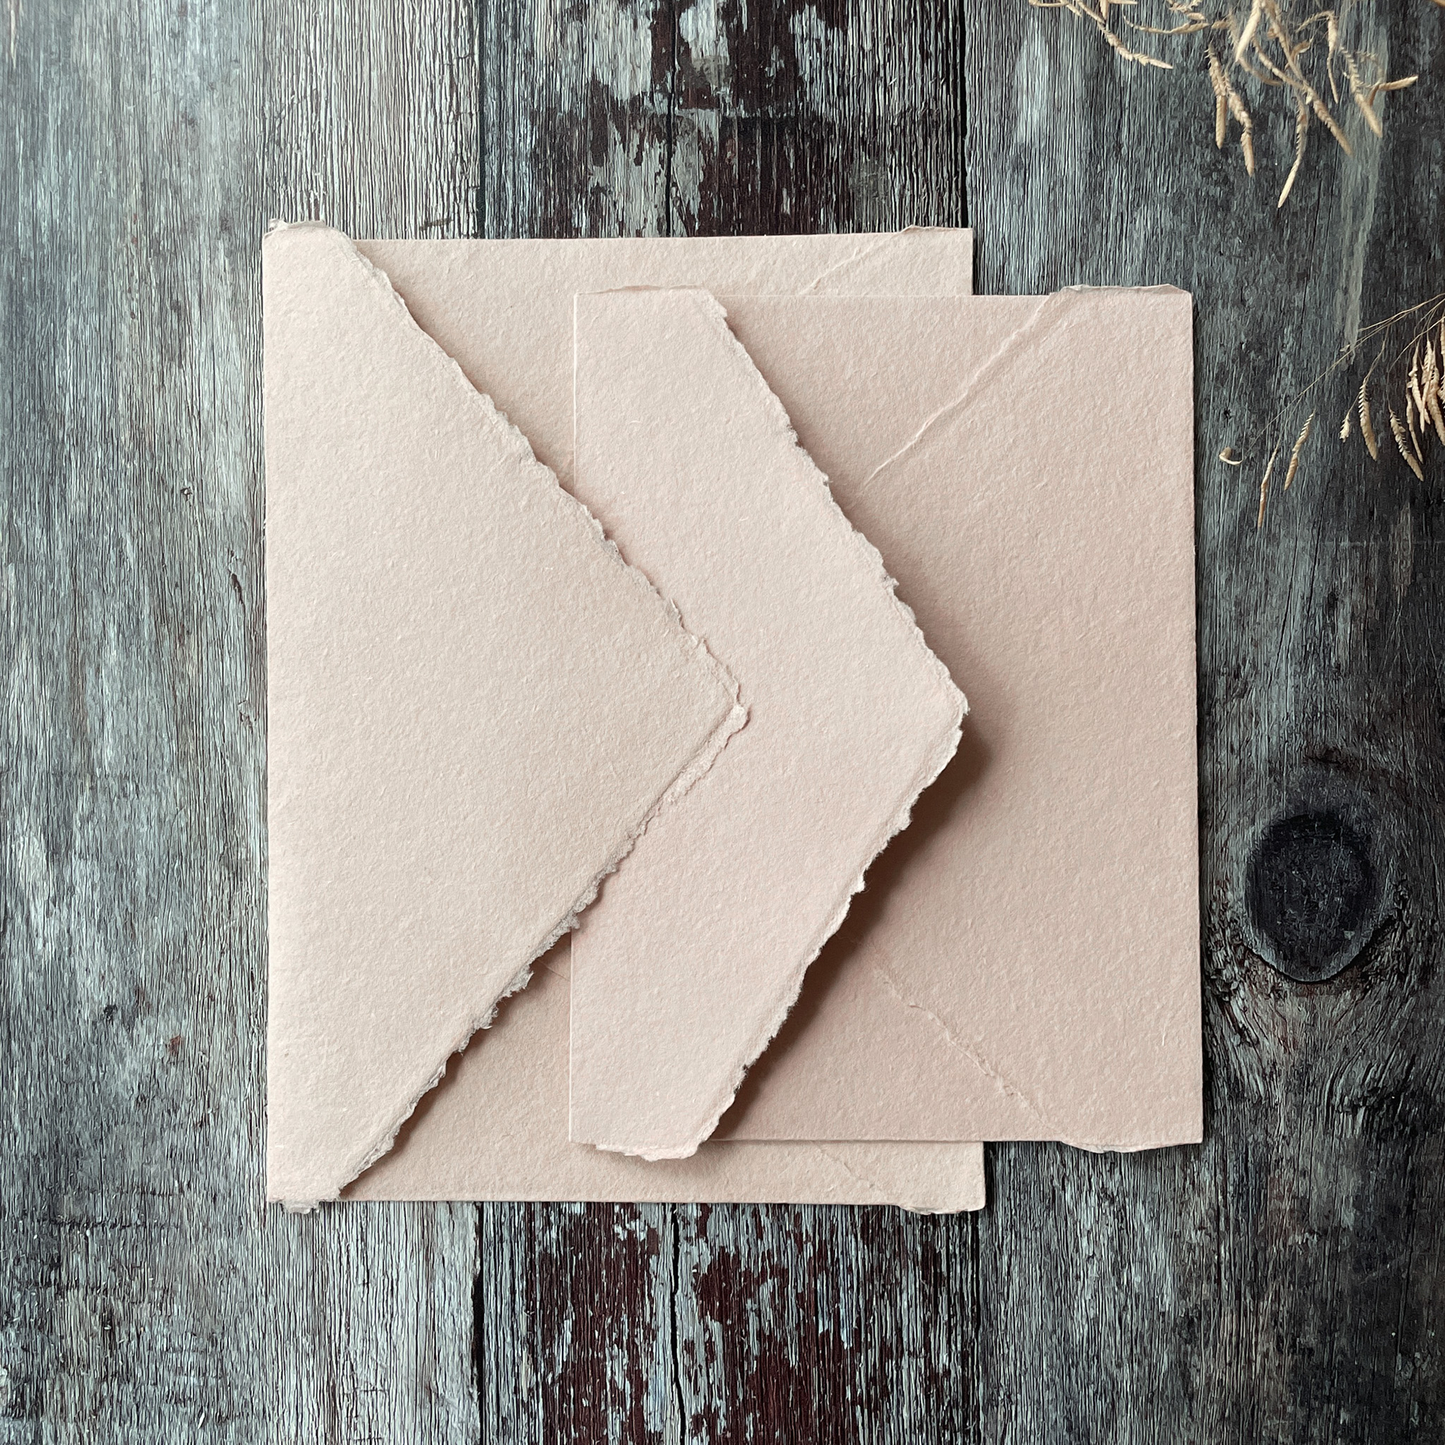 Invitation envelopes made from blush pink handmade paper.  Deckle edge envelopes with a pointed flap.  Handmade invitation envelopes made from recycled cotton rag fibres.  By The Natural Paper Company